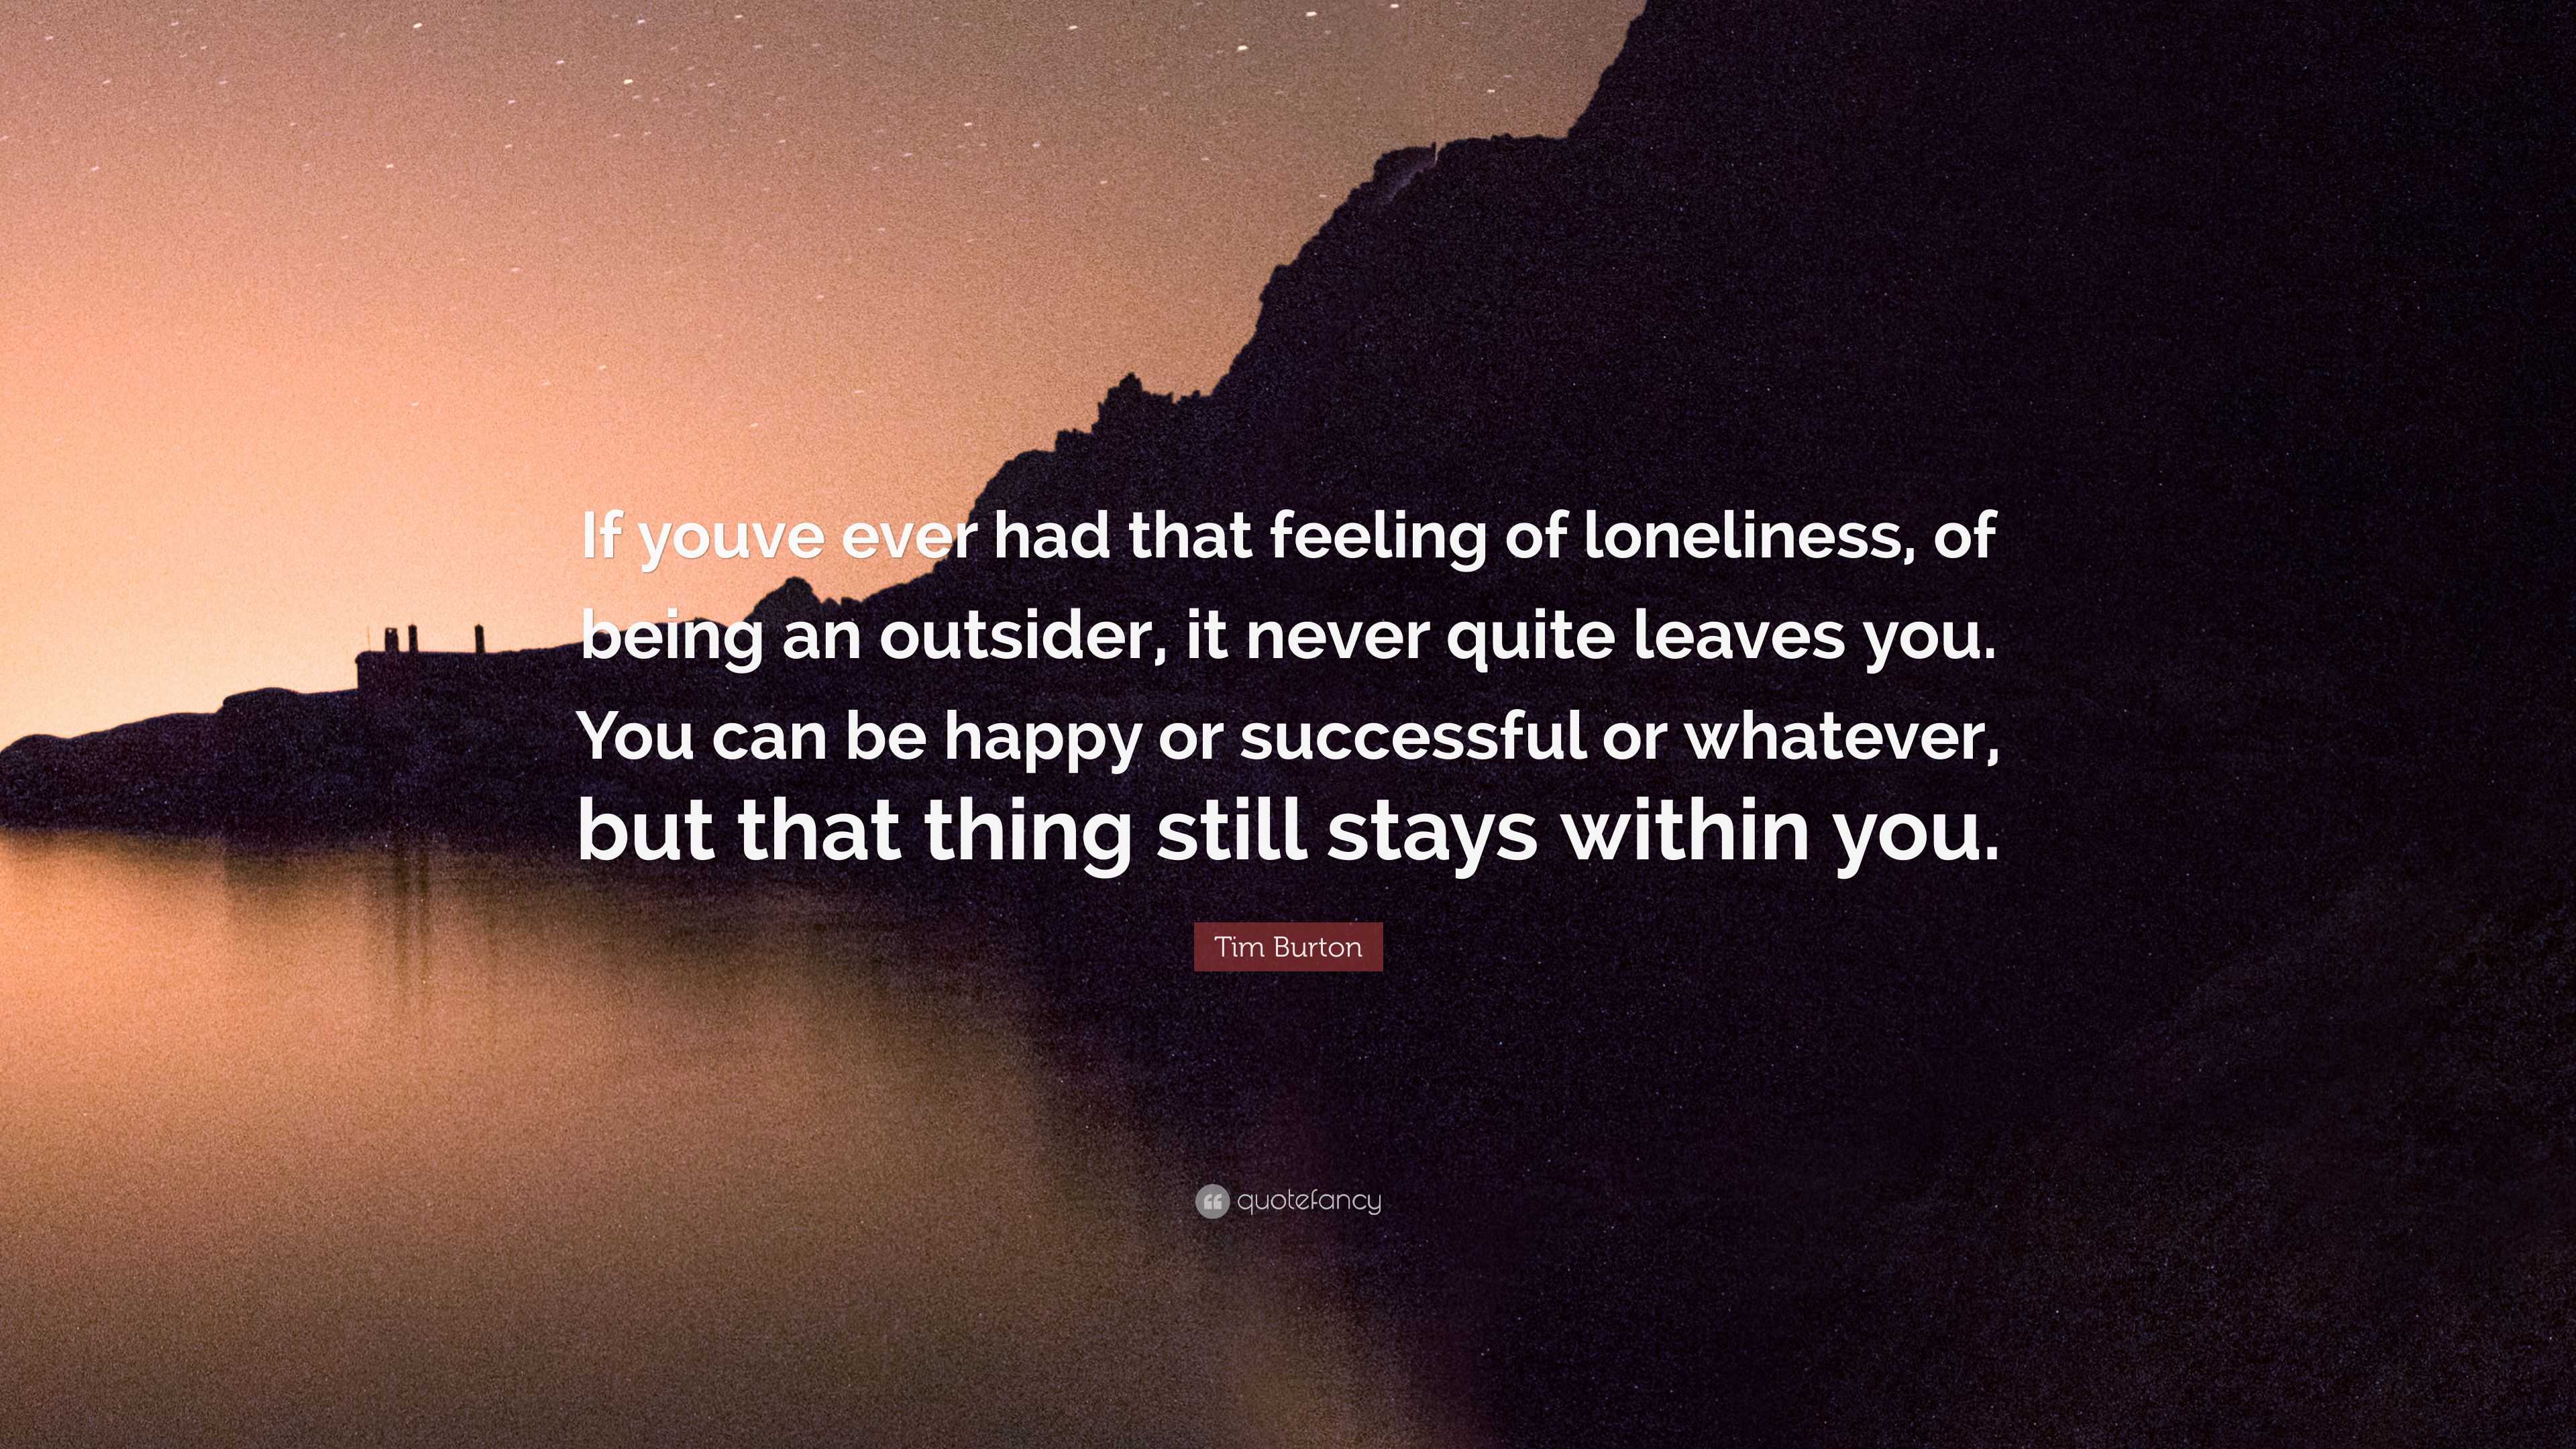 Tim Burton Quote: “If youve ever had that feeling of loneliness, of ...